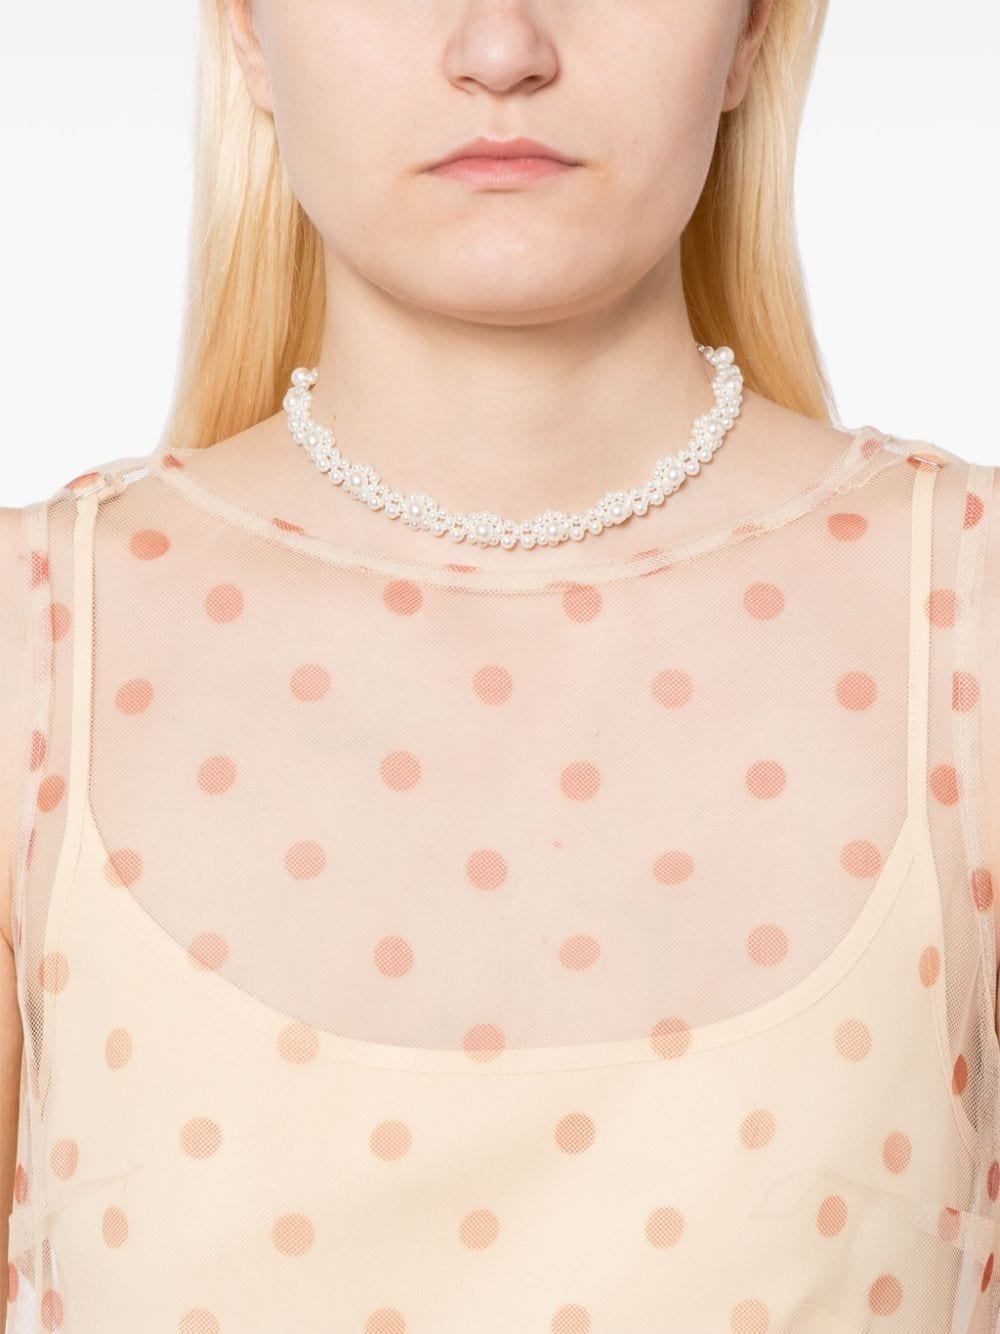 Daisy faux-pearl necklace - 2